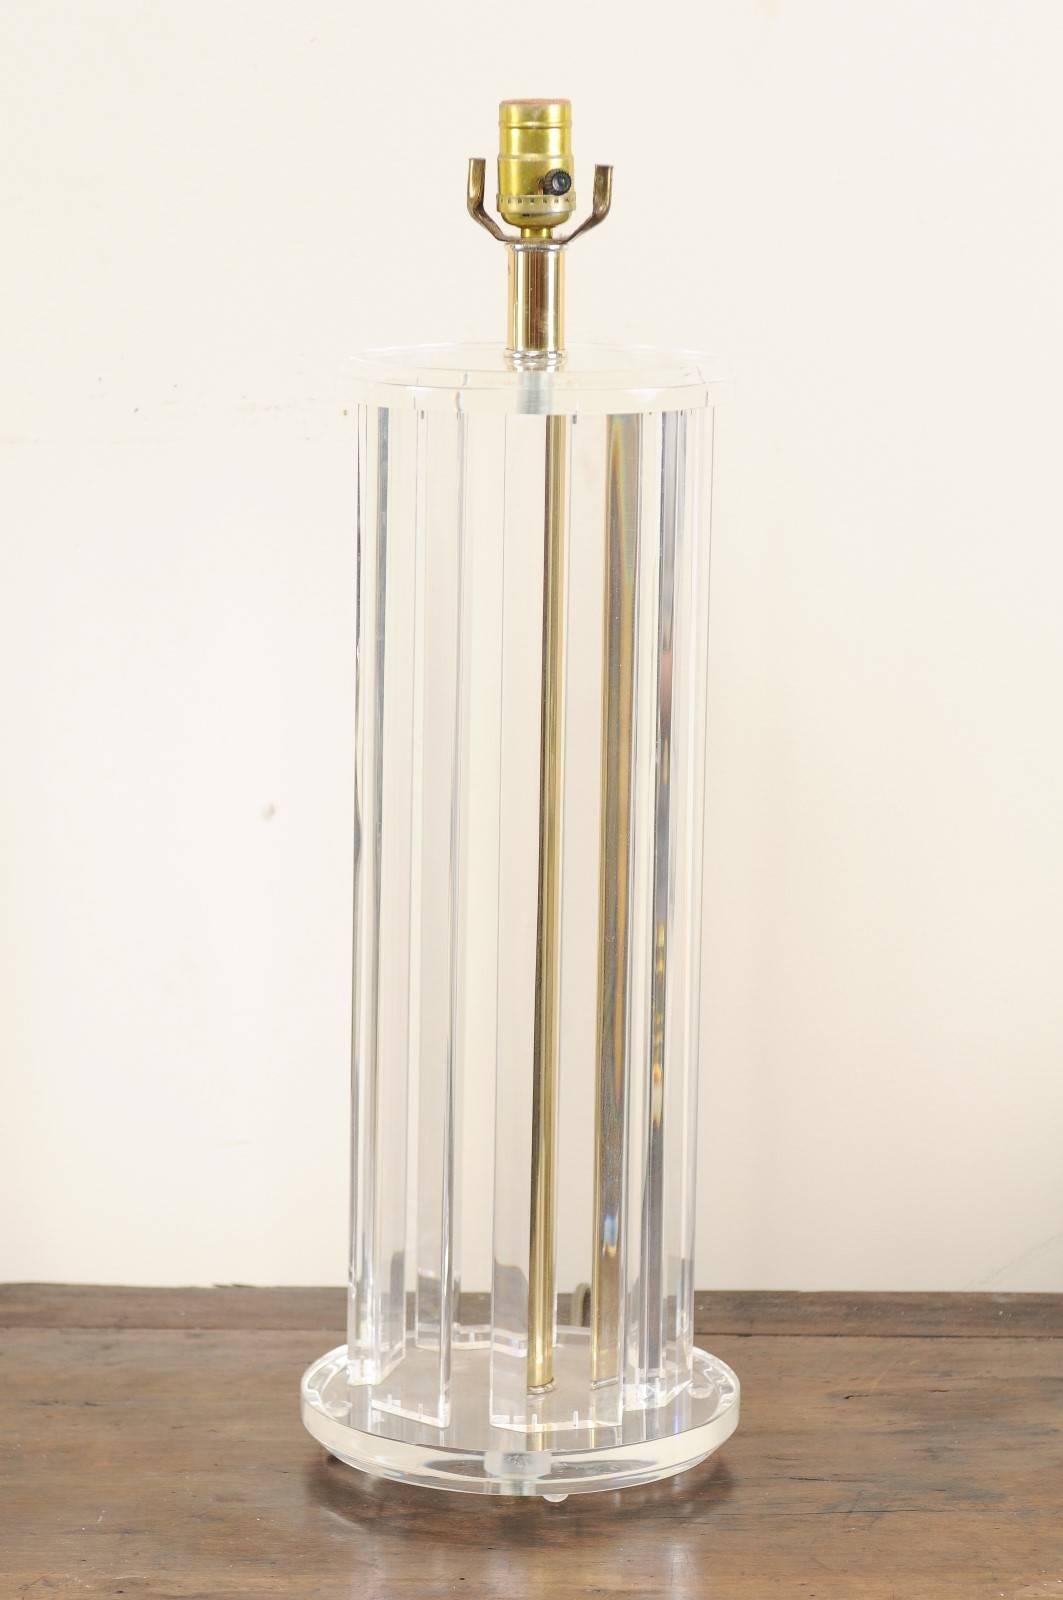 Pair of Lucite Mid-20th Century Table Lamps with Round Shape and Gold Tones 1